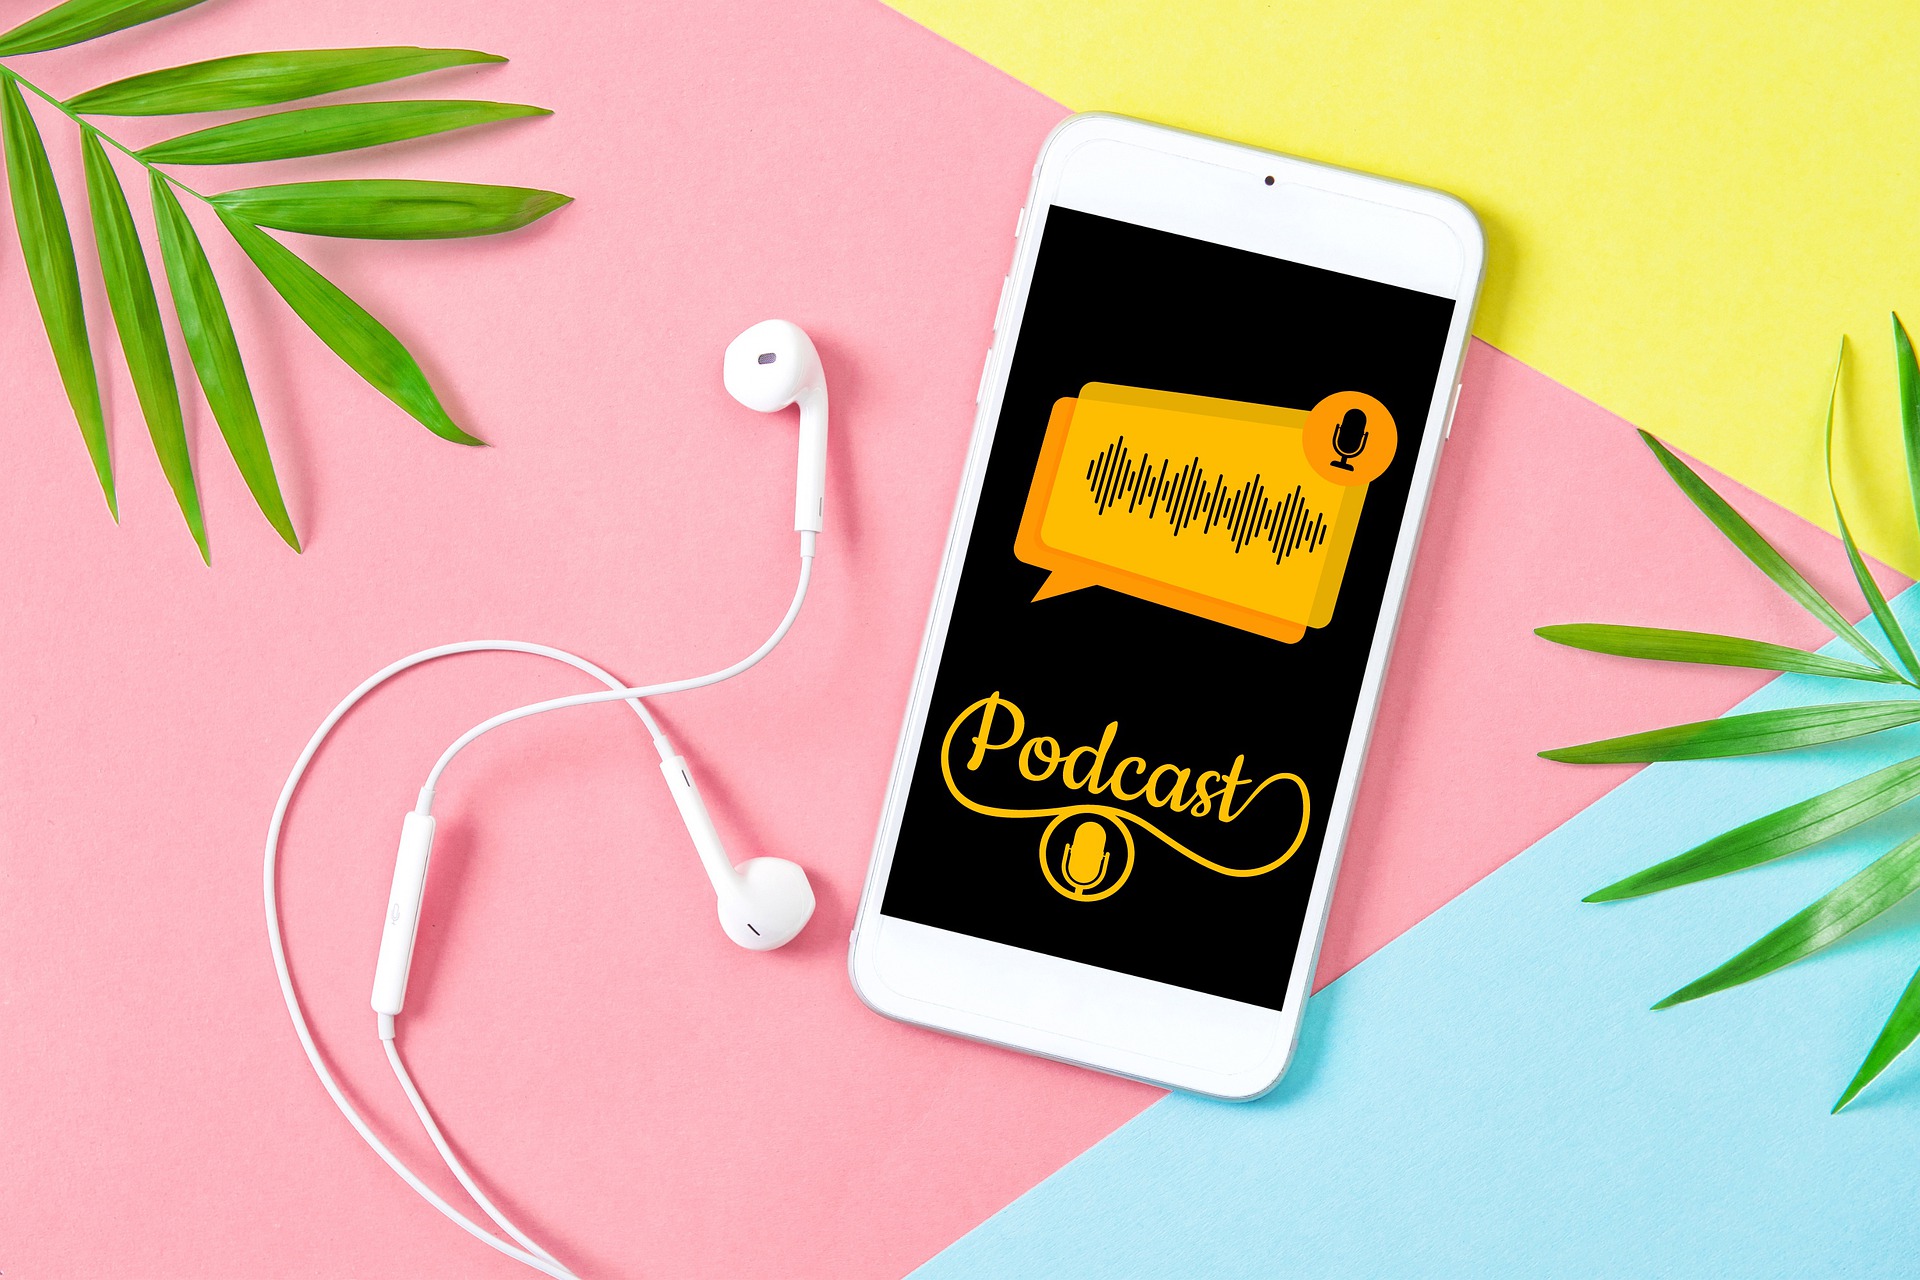 How to Create a Podcast and Grow Your Podcast?